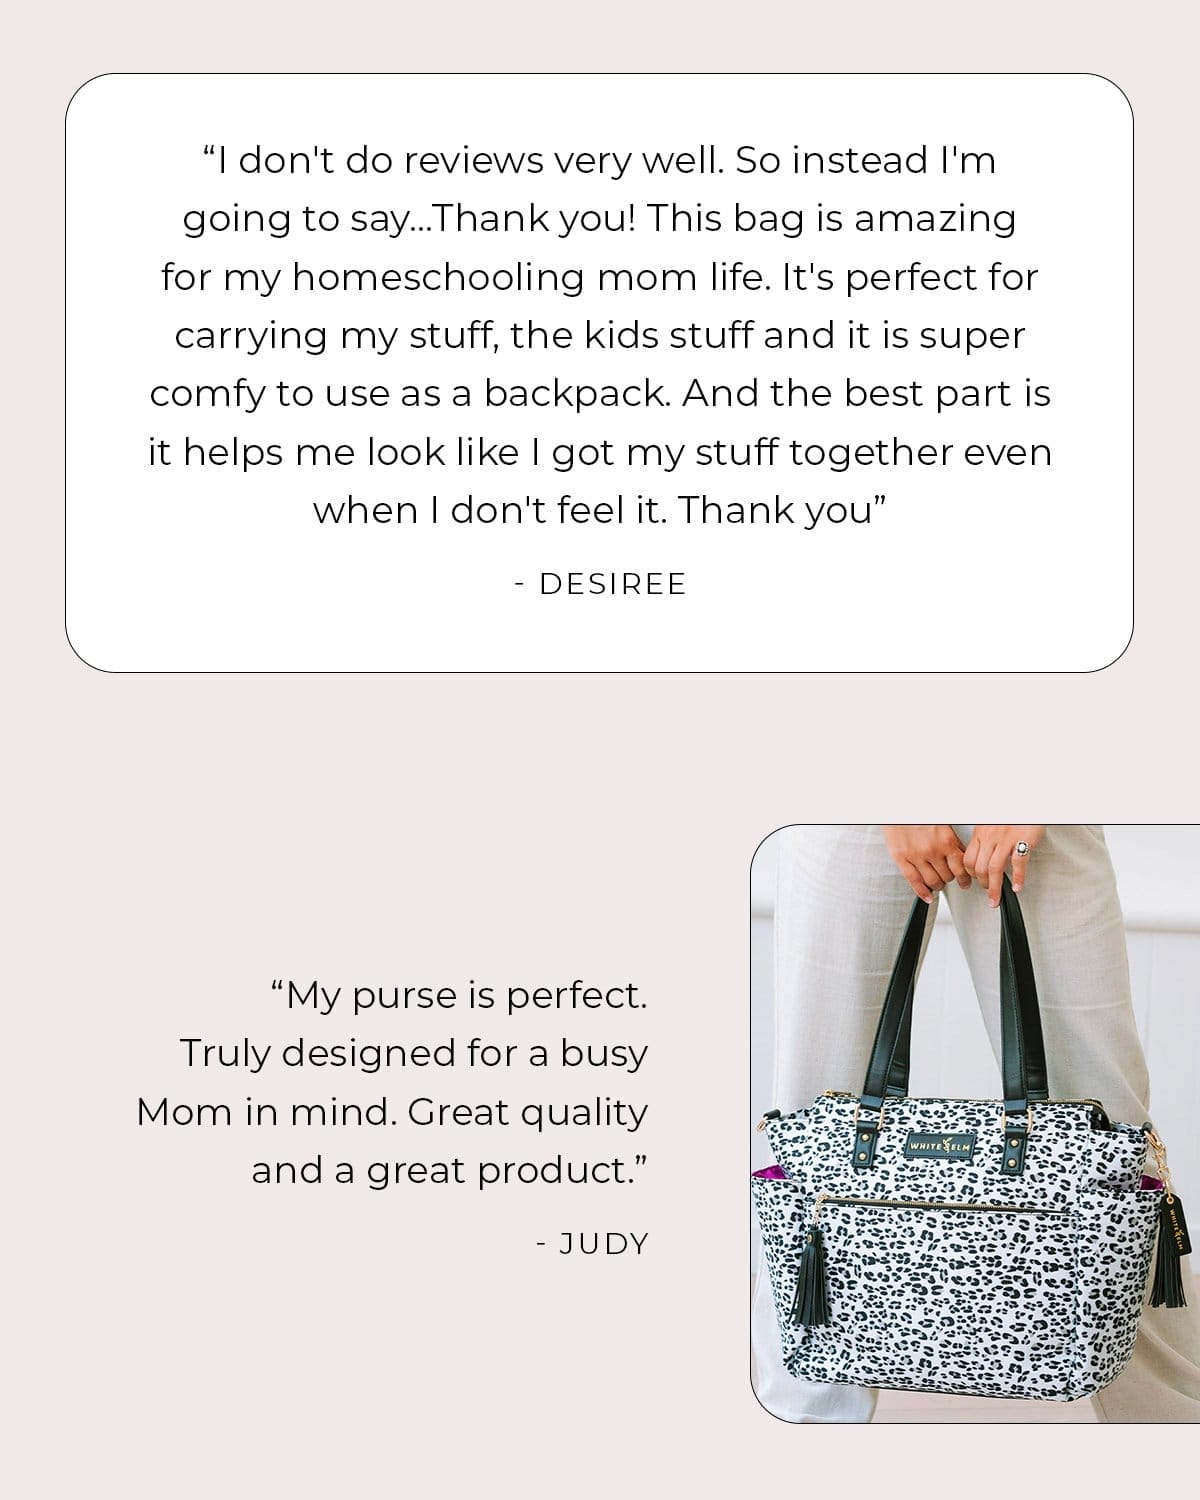 ”I don't do reviews very well. So instead I'm going to say...Thank you! This bag is amazing for my homeschooling mom life. It's perfect for carrying my stuff, the kids stuff and it is super comfy to use as a backpack. And the best part is it helps me look like I got my stuff together even when I don't feel it. Thank you” - Desiree ”My purse is perfect. Truly designed for a busy Mom in mind. Great quality and a great product.” -Judy